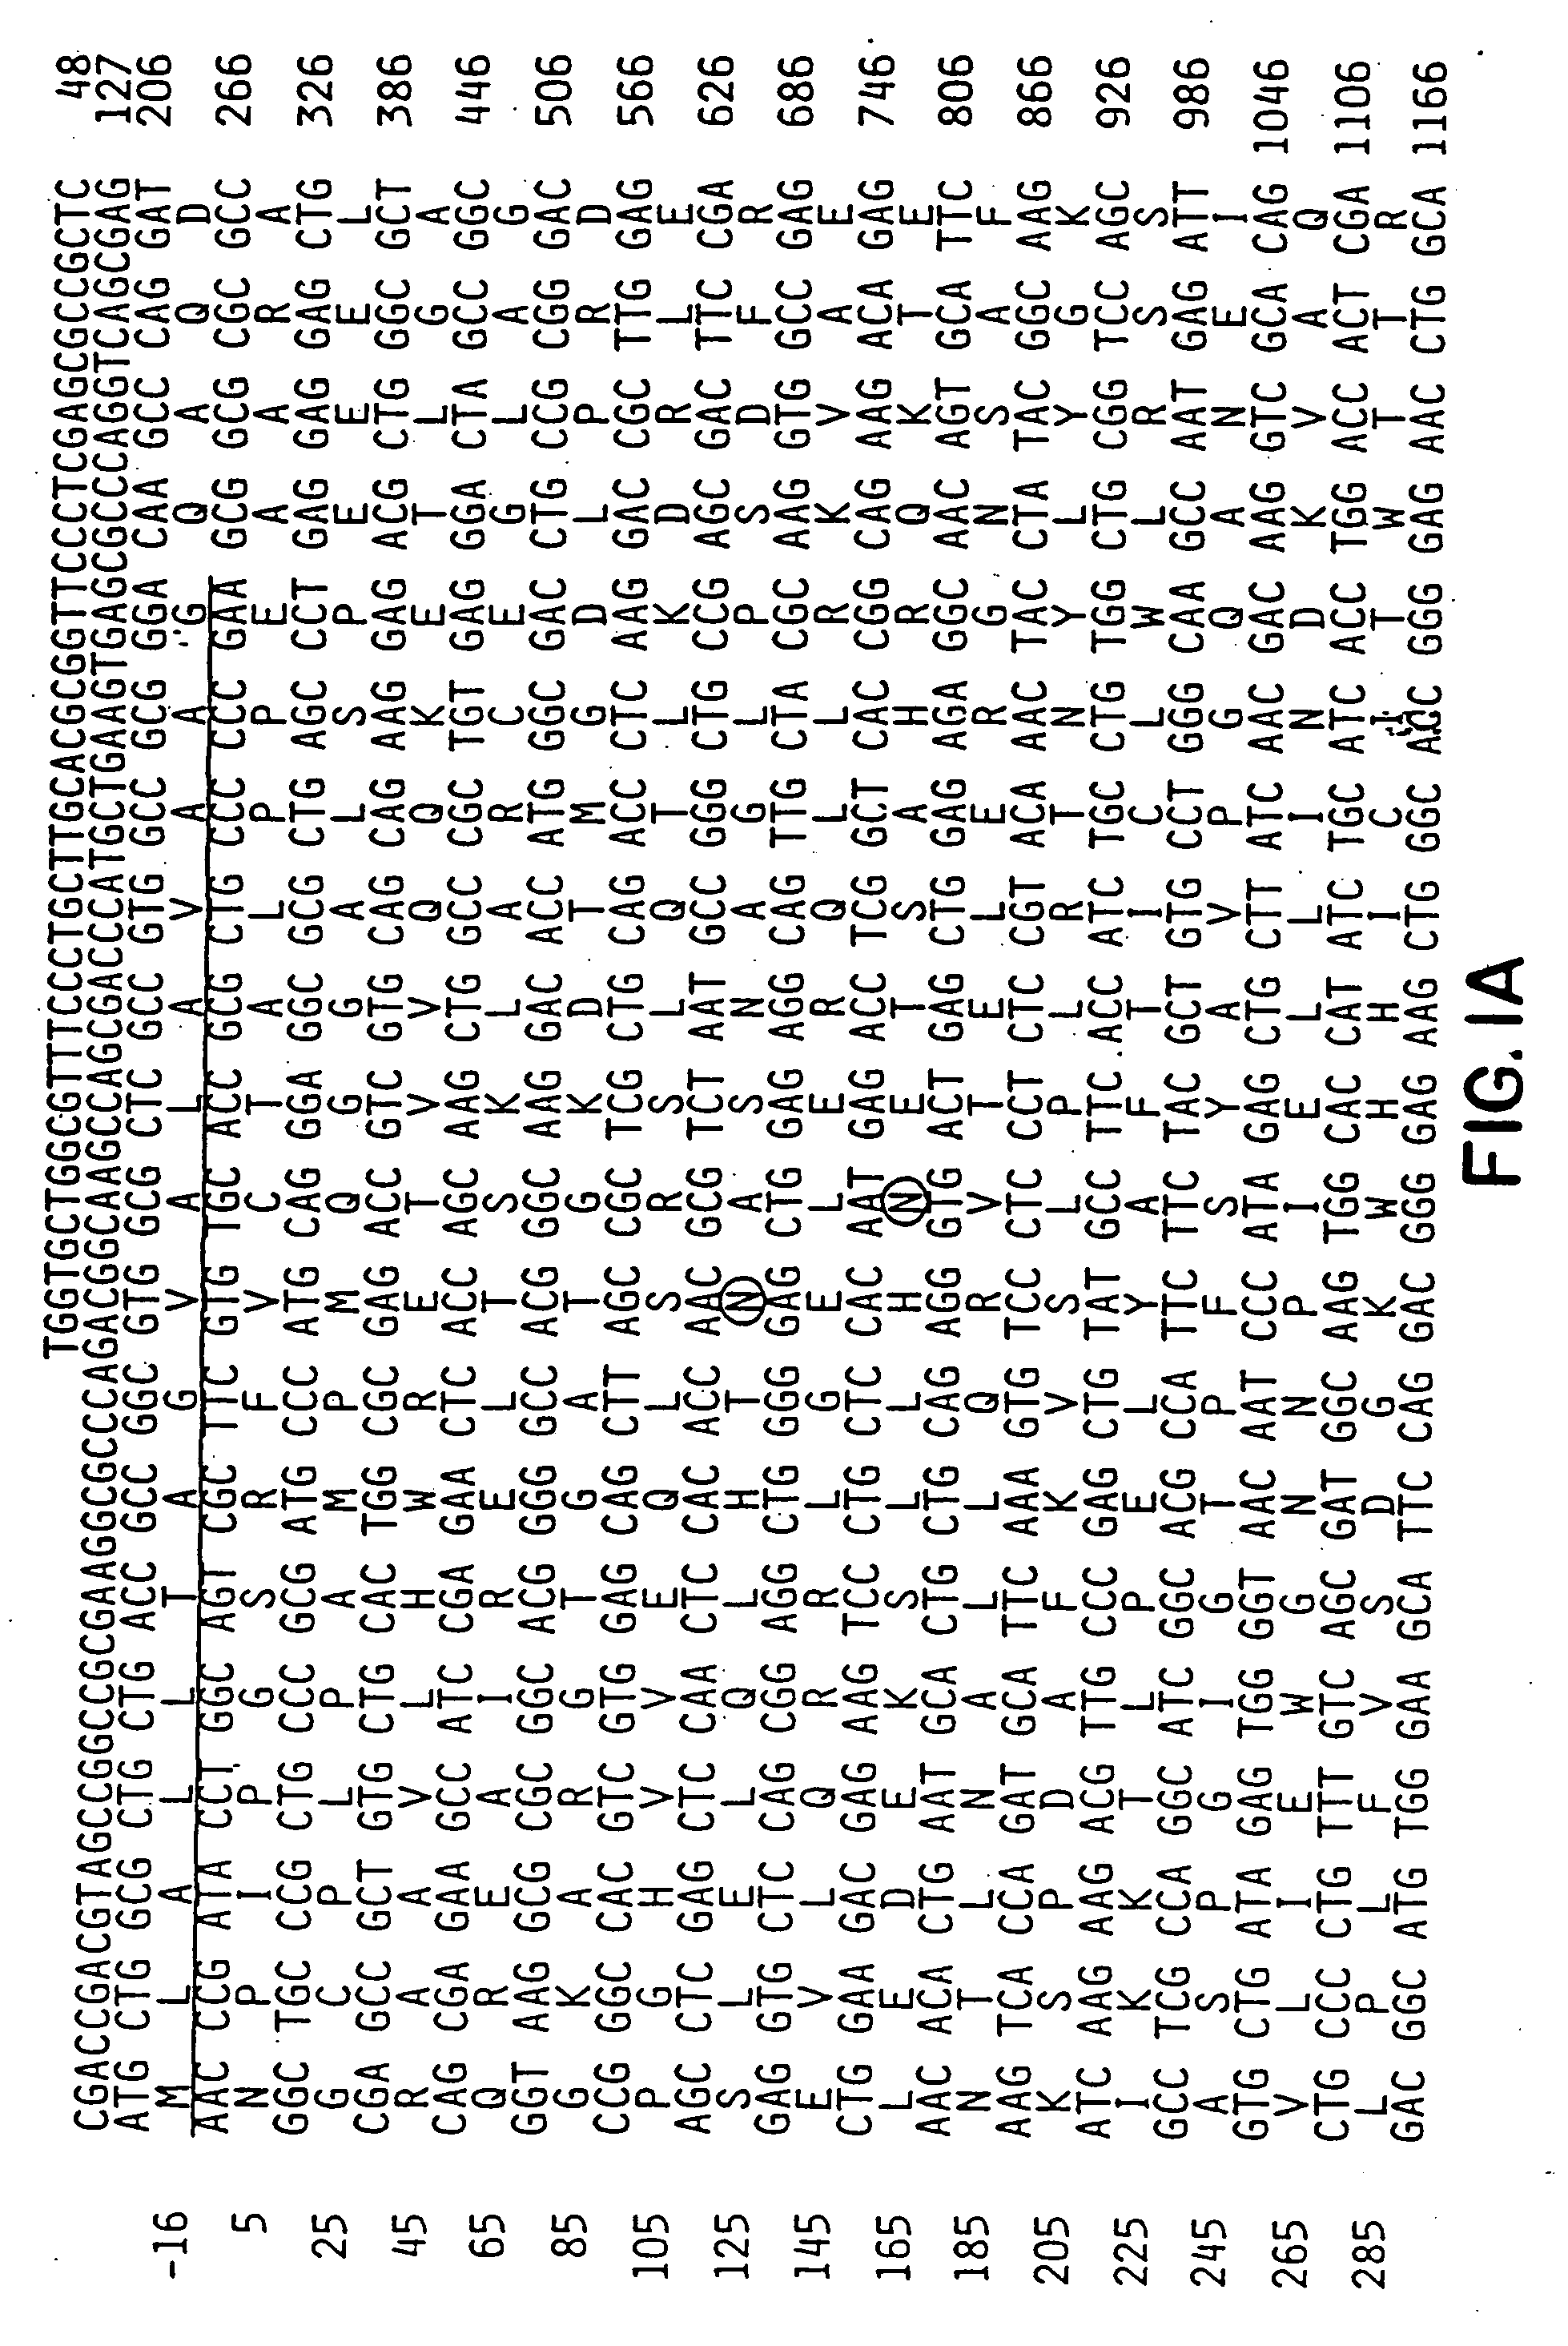 Method for identifying compounds which affect synaptogenesis